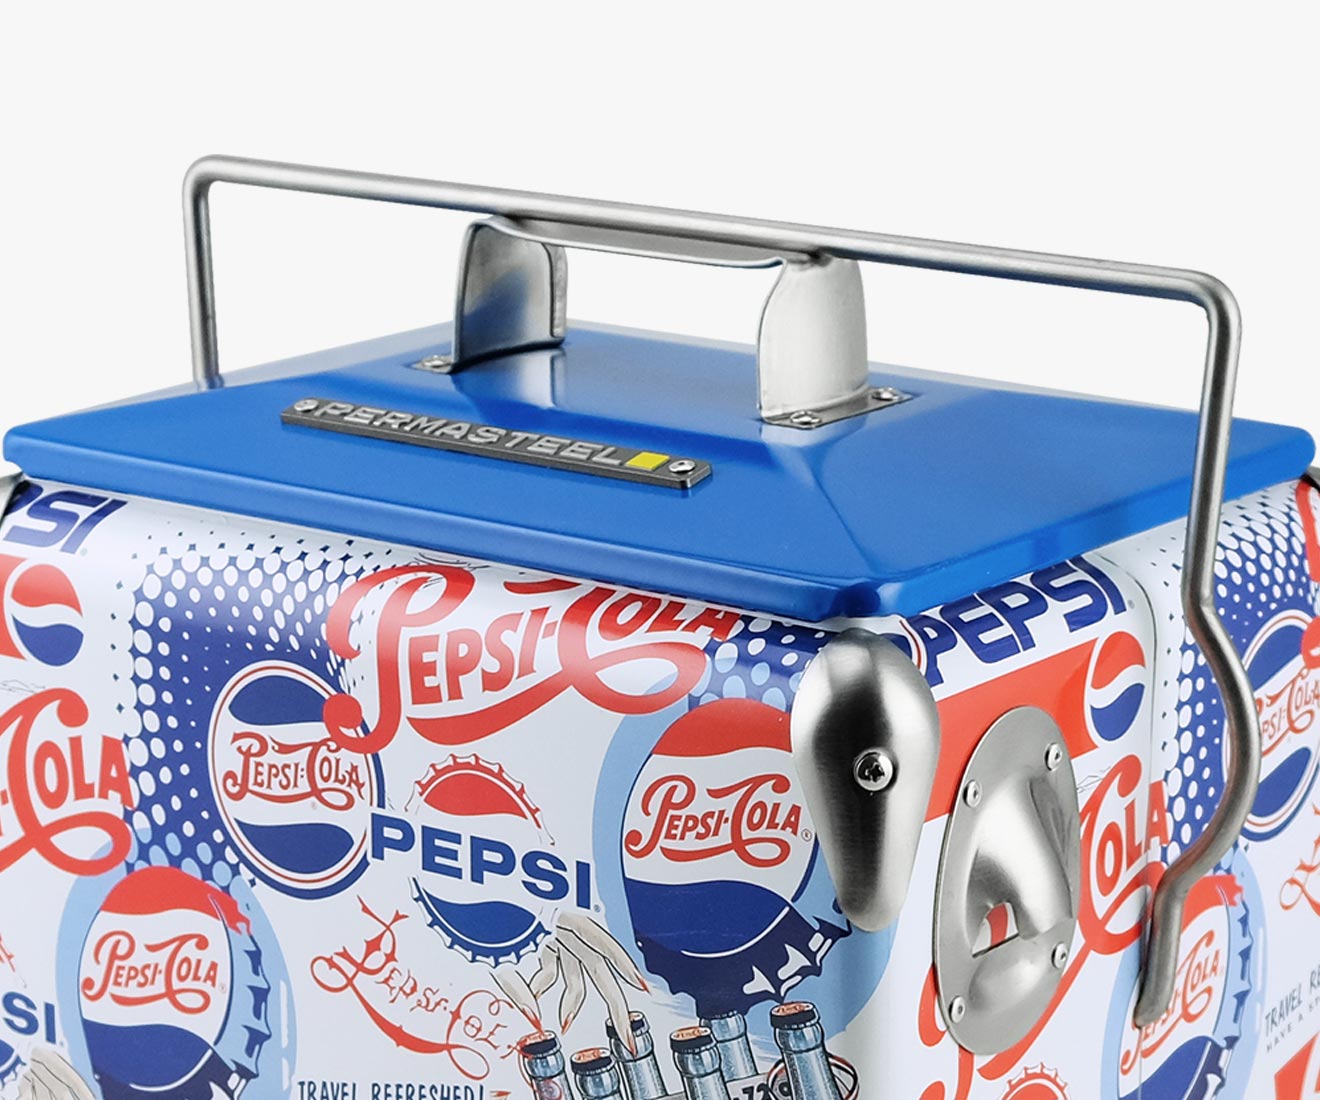 https://permasteel.life/wp-content/uploads/2023/03/permasteel-ps-205-14pe-wg-small-portable-picnic-cooler-pepsi-wrapped-graphic-product-features-image-3.jpg